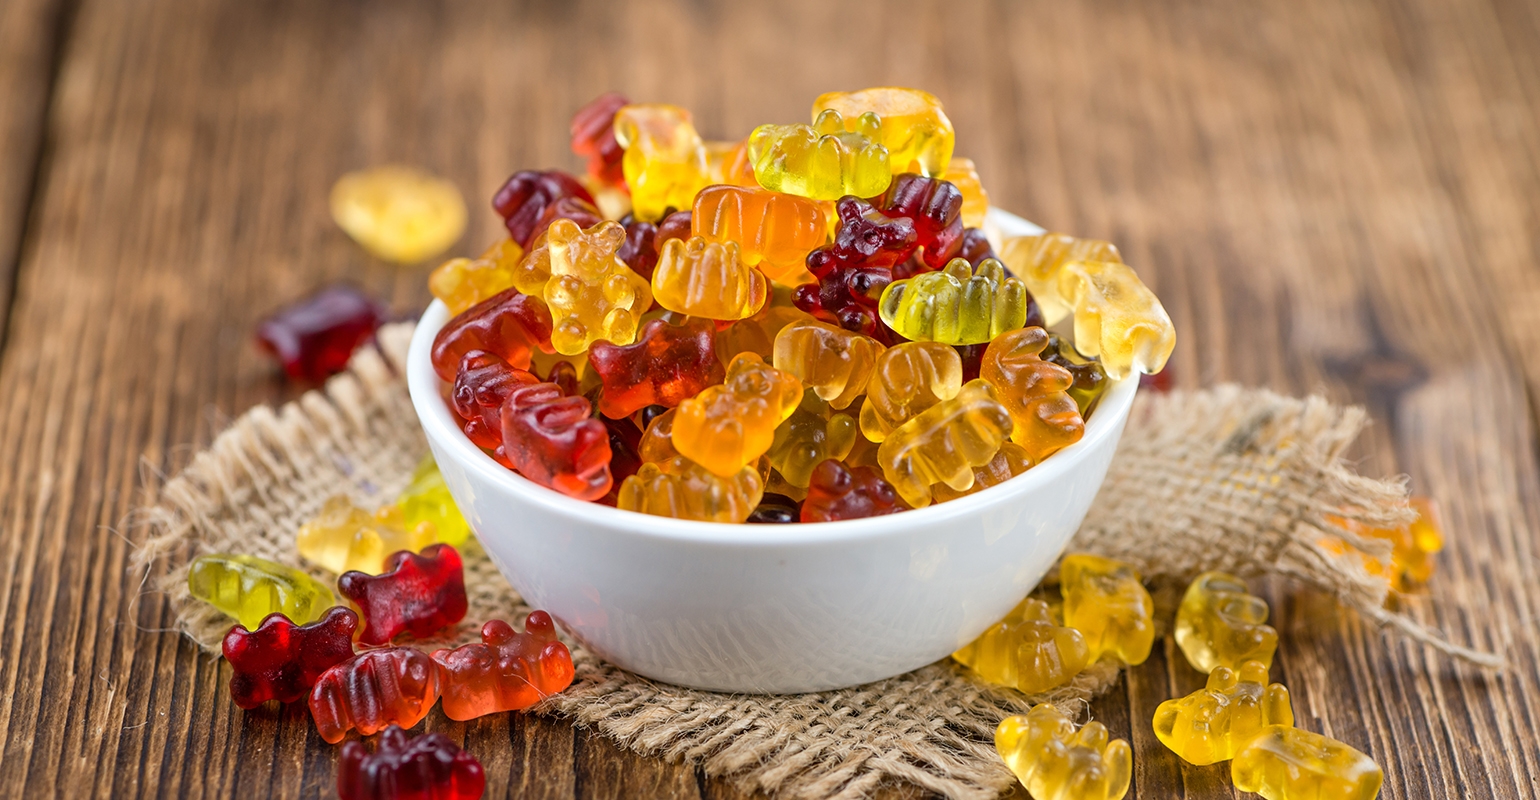 Taking away stress and making rest better: the secret benefits of Delta 9 Gummies